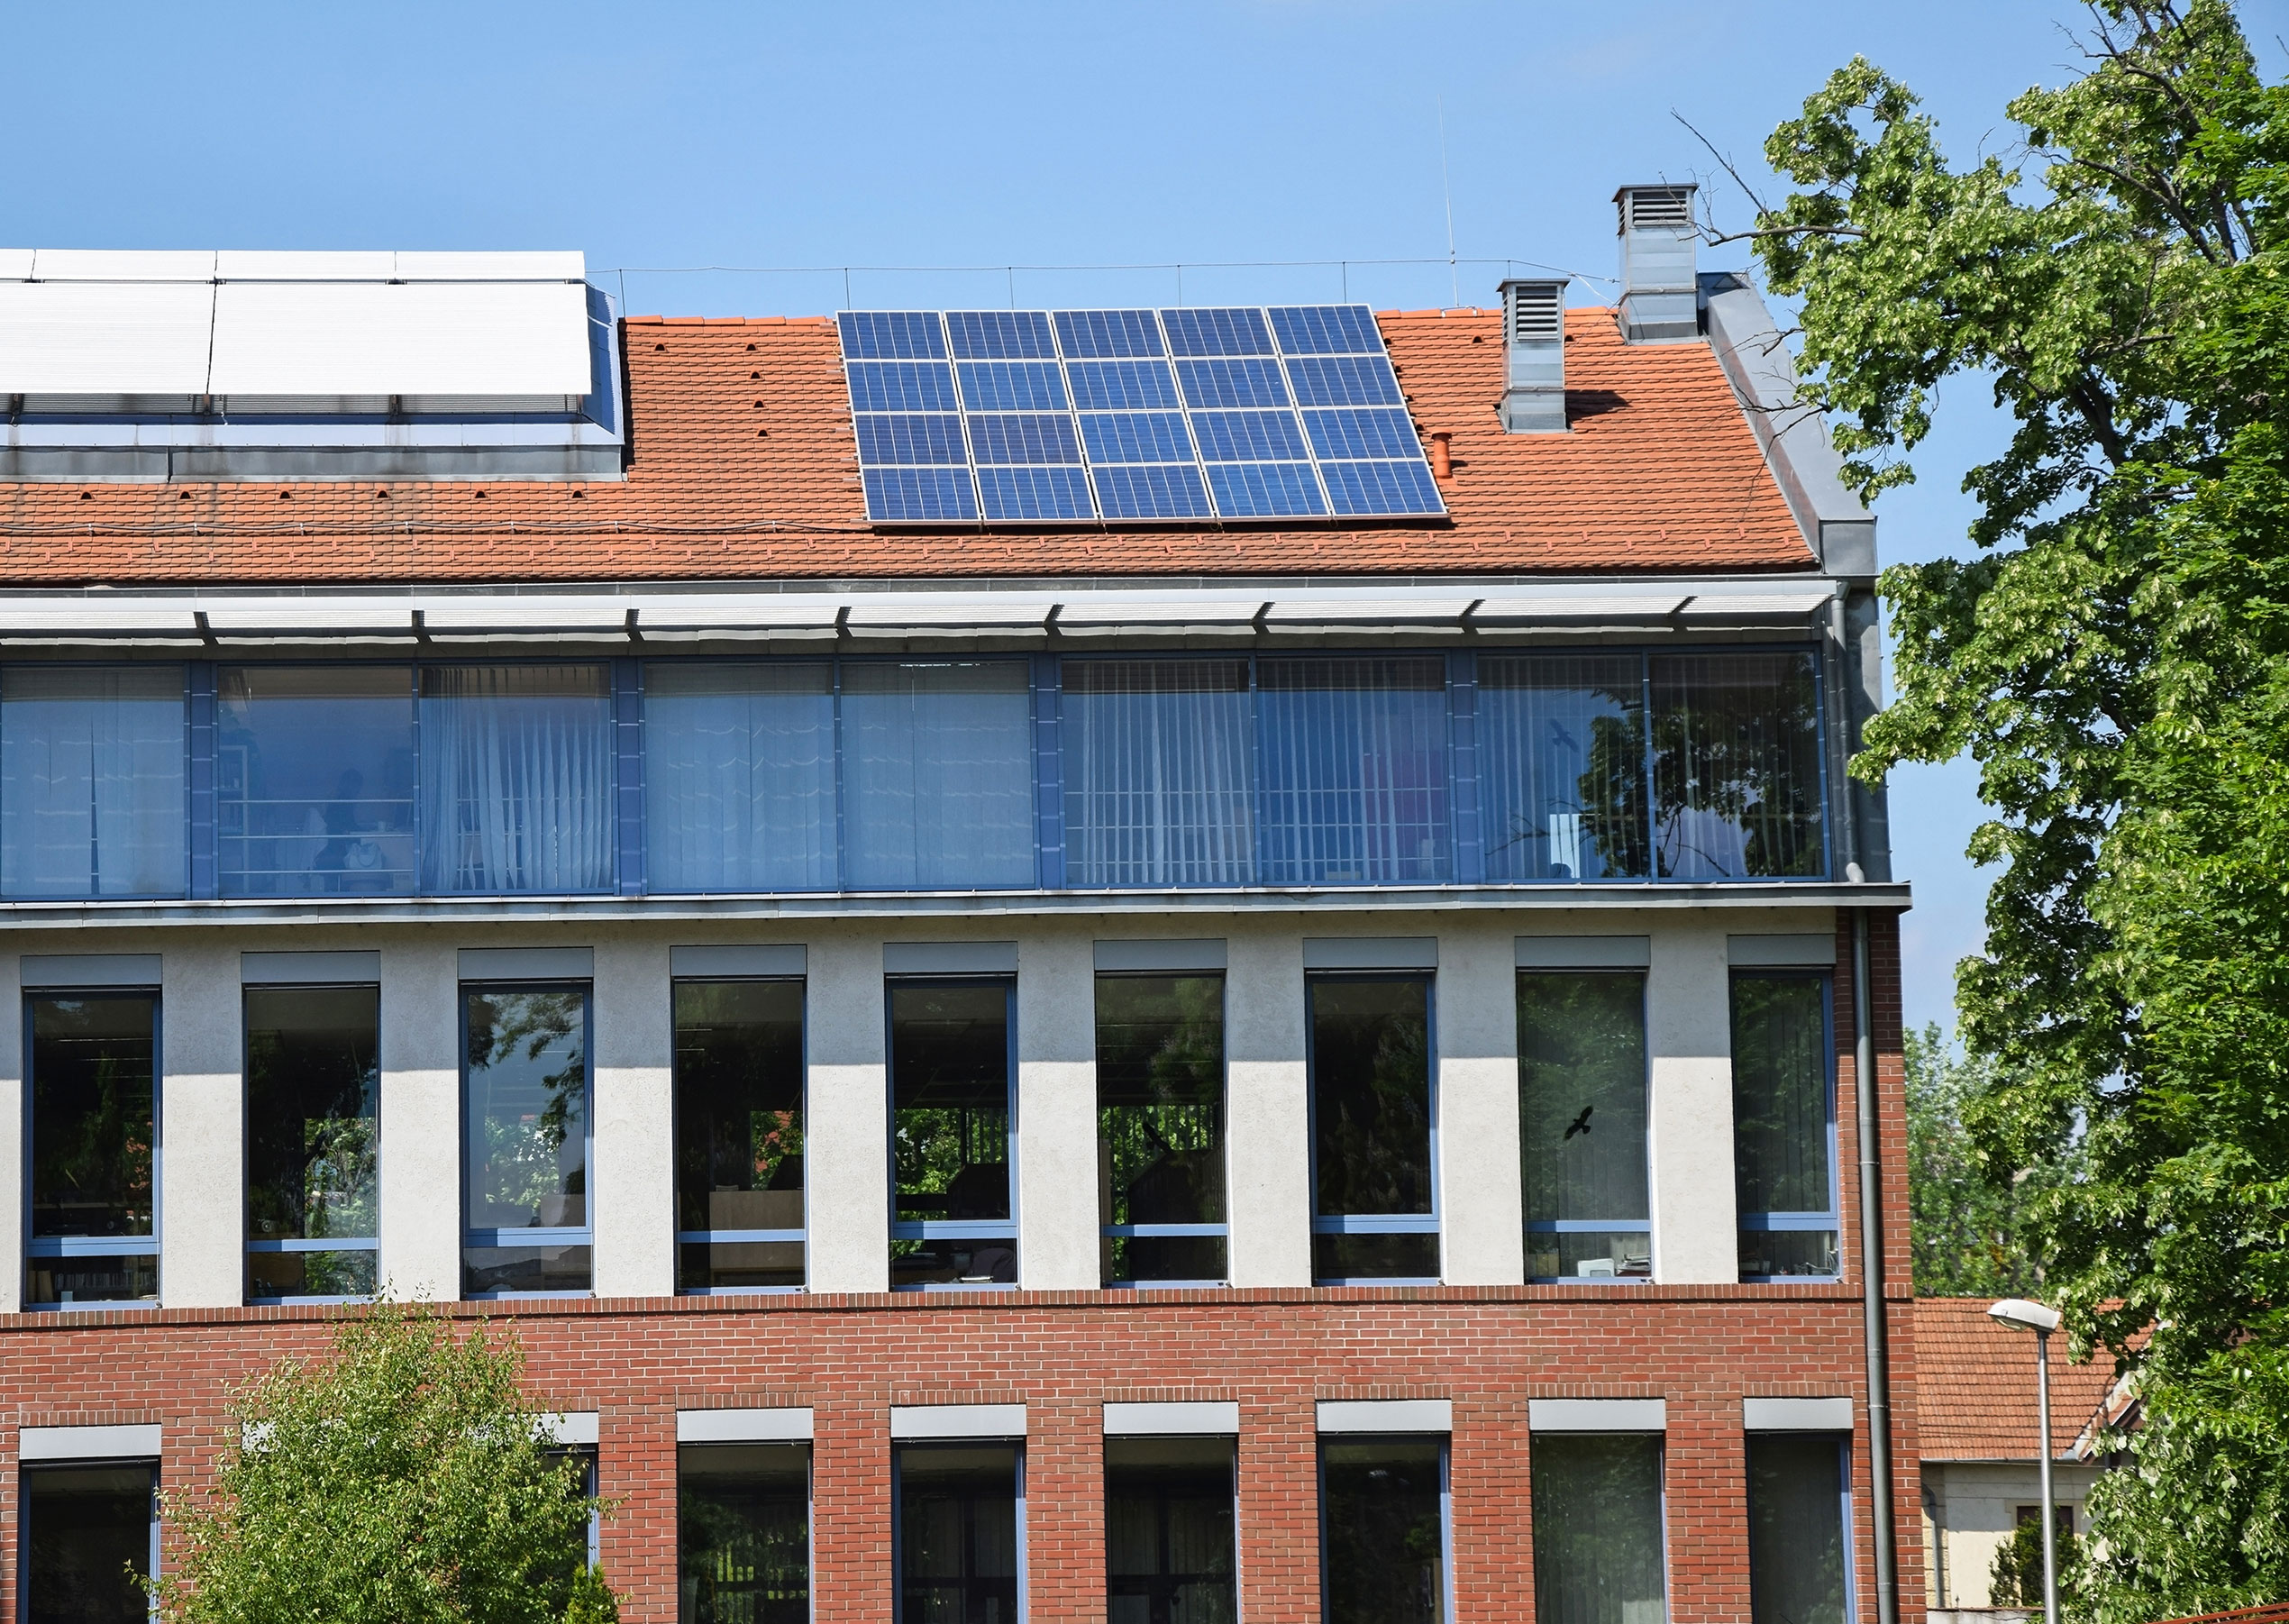 Building of the public library with solar panels